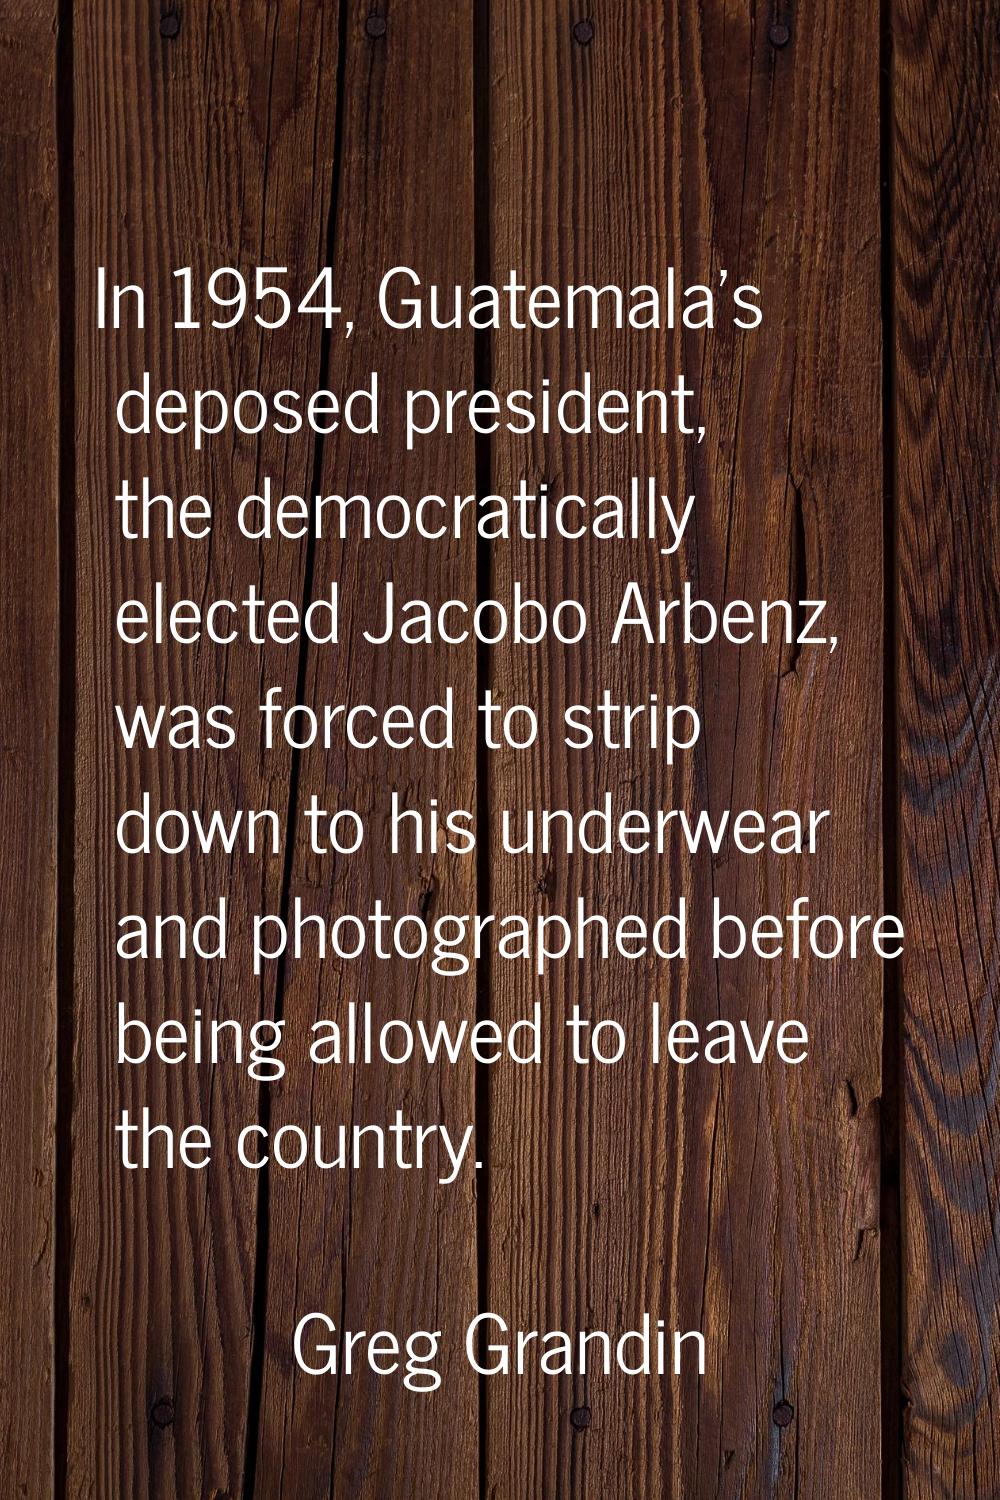 In 1954, Guatemala's deposed president, the democratically elected Jacobo Arbenz, was forced to str